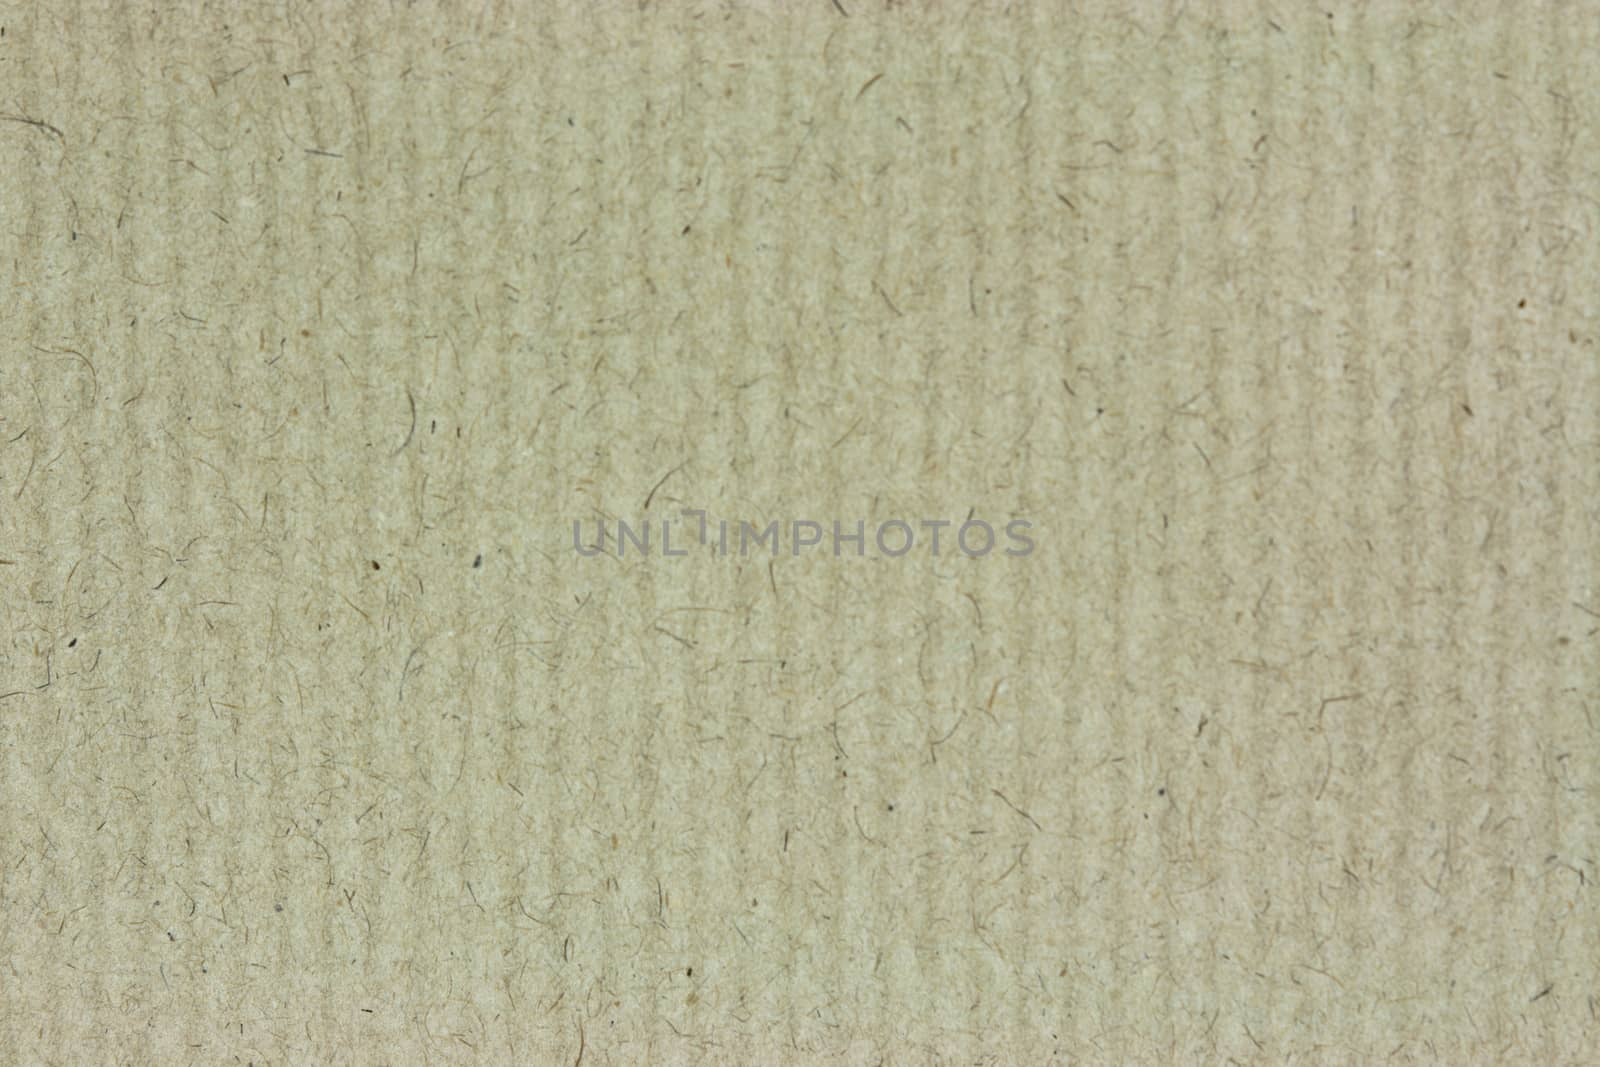 Brown parcel paper shown close up with grain